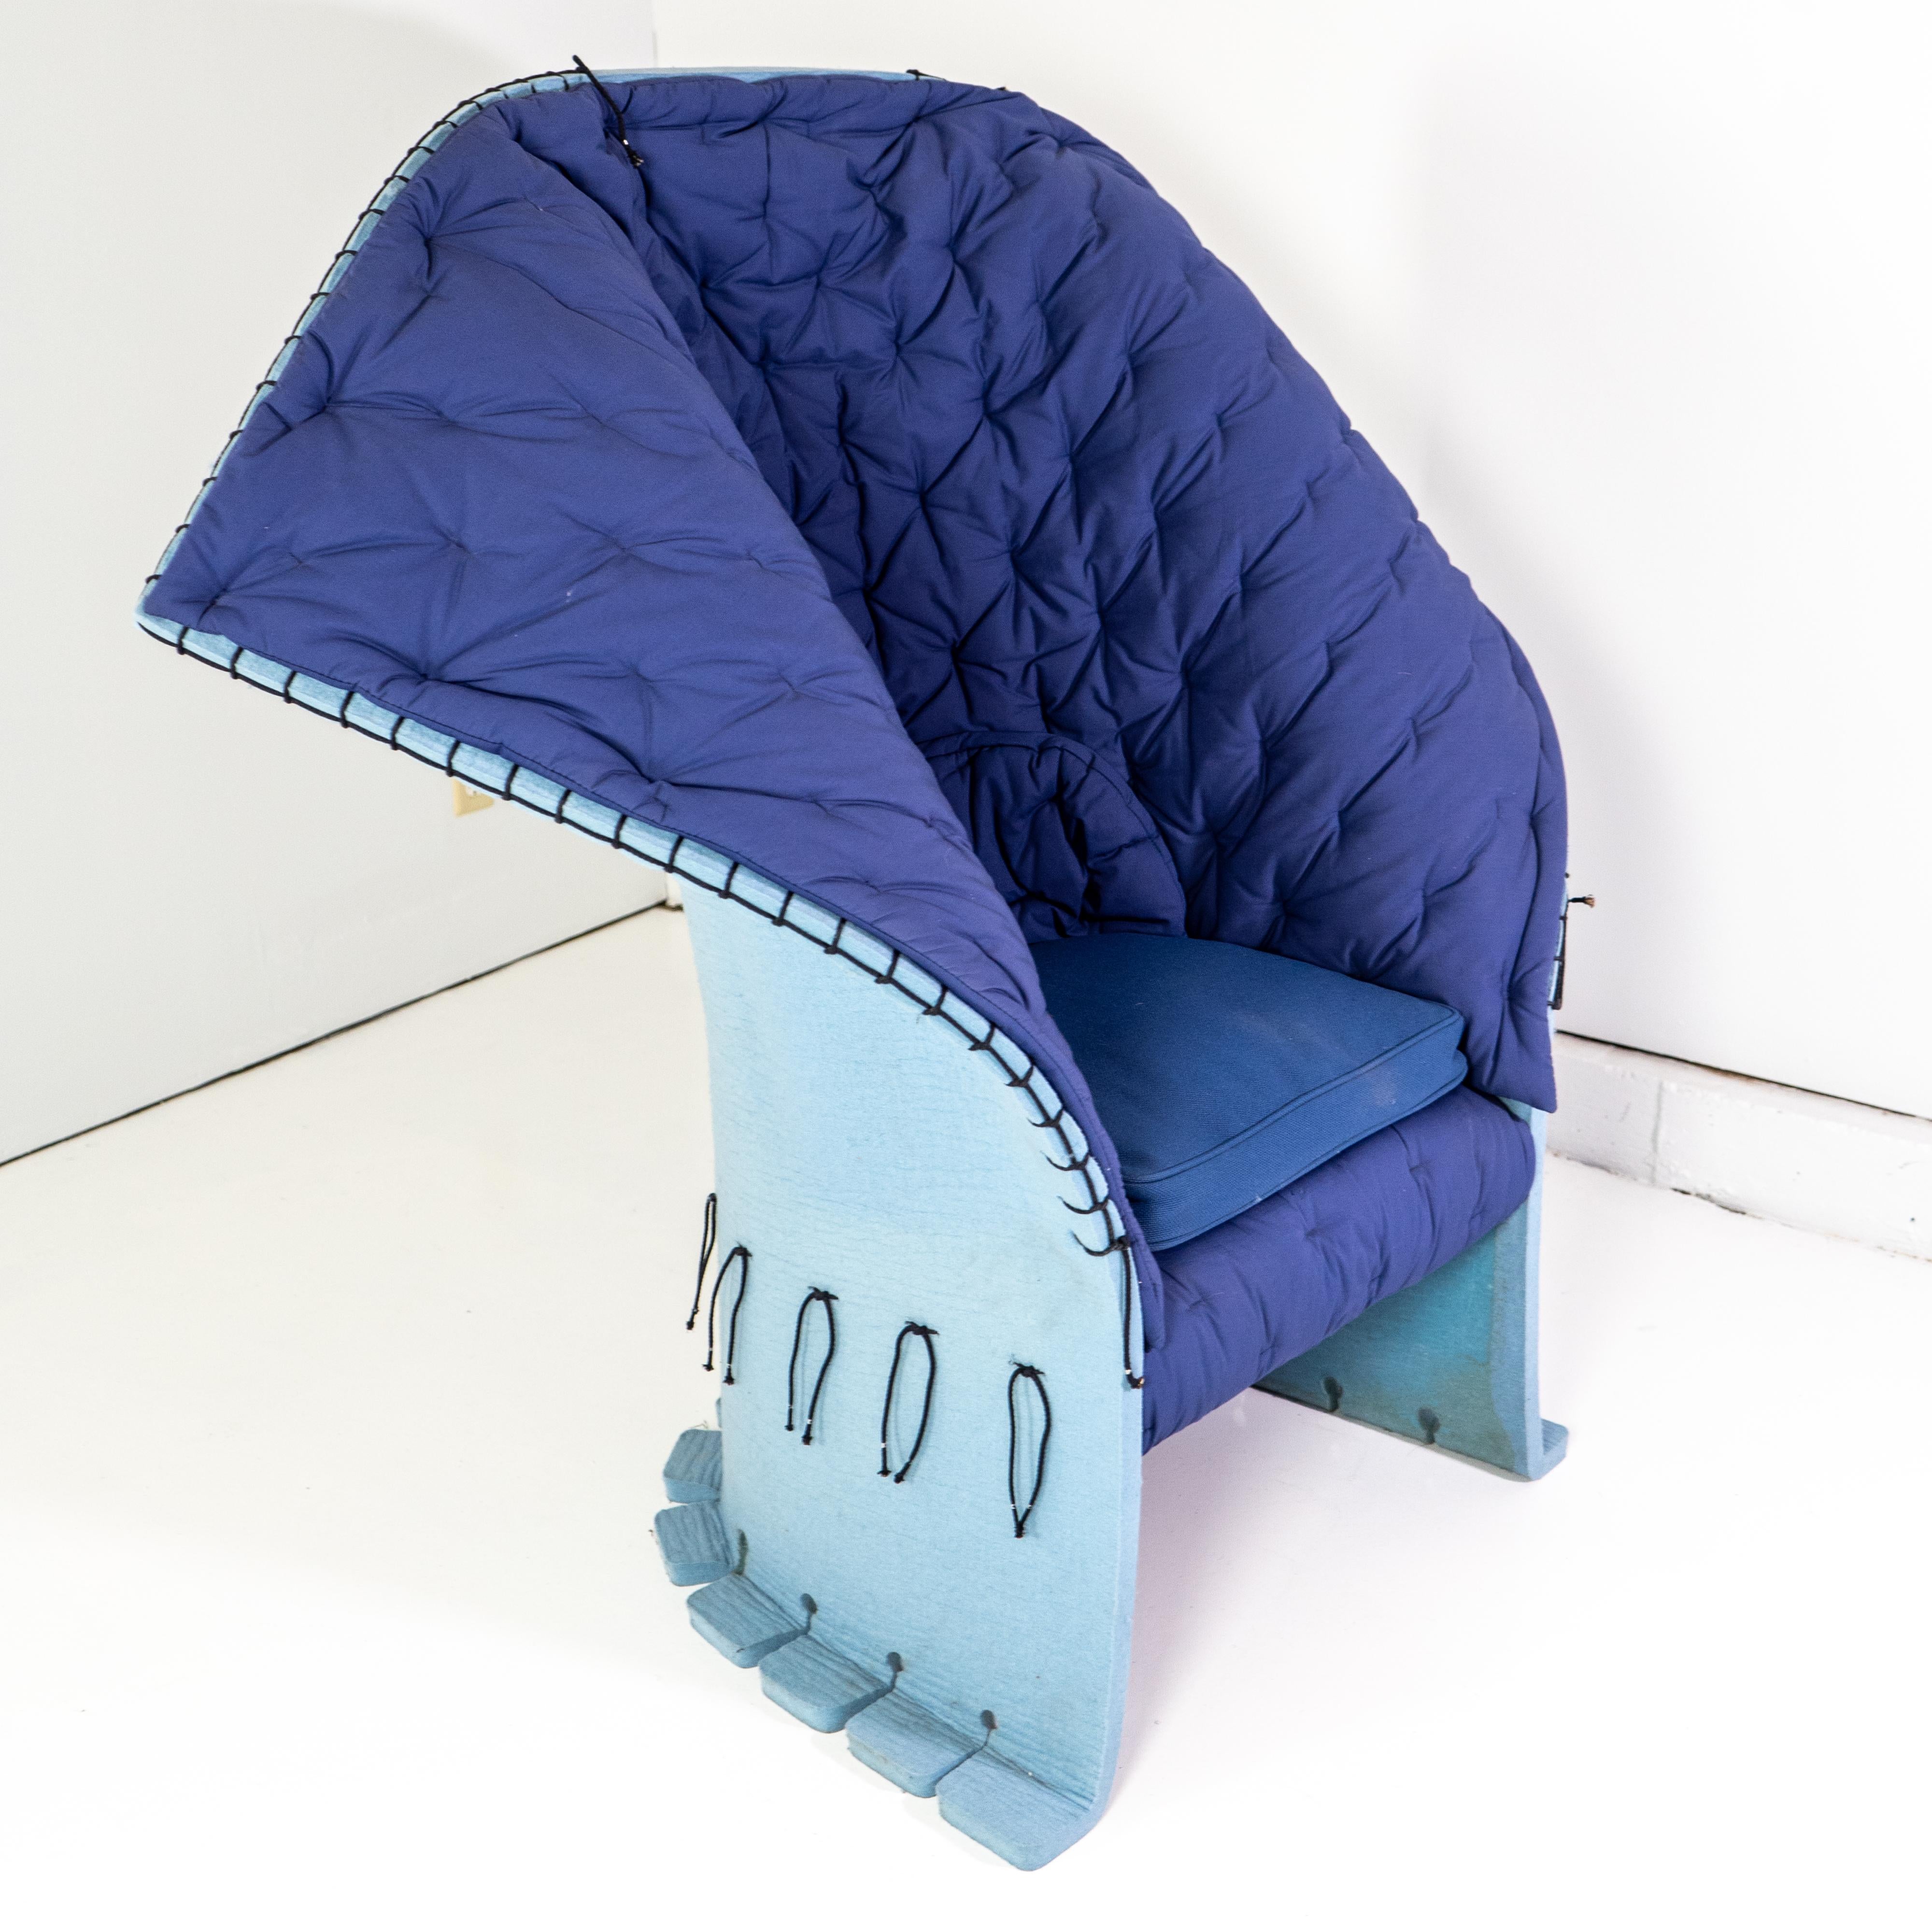 Resin-covered felt with quilted cushions. Hard, solid seat with a pliable back. Pesce conceived the idea for the Feltri while walking in the rain and noticing a patch of felt soaking up the water in the street.